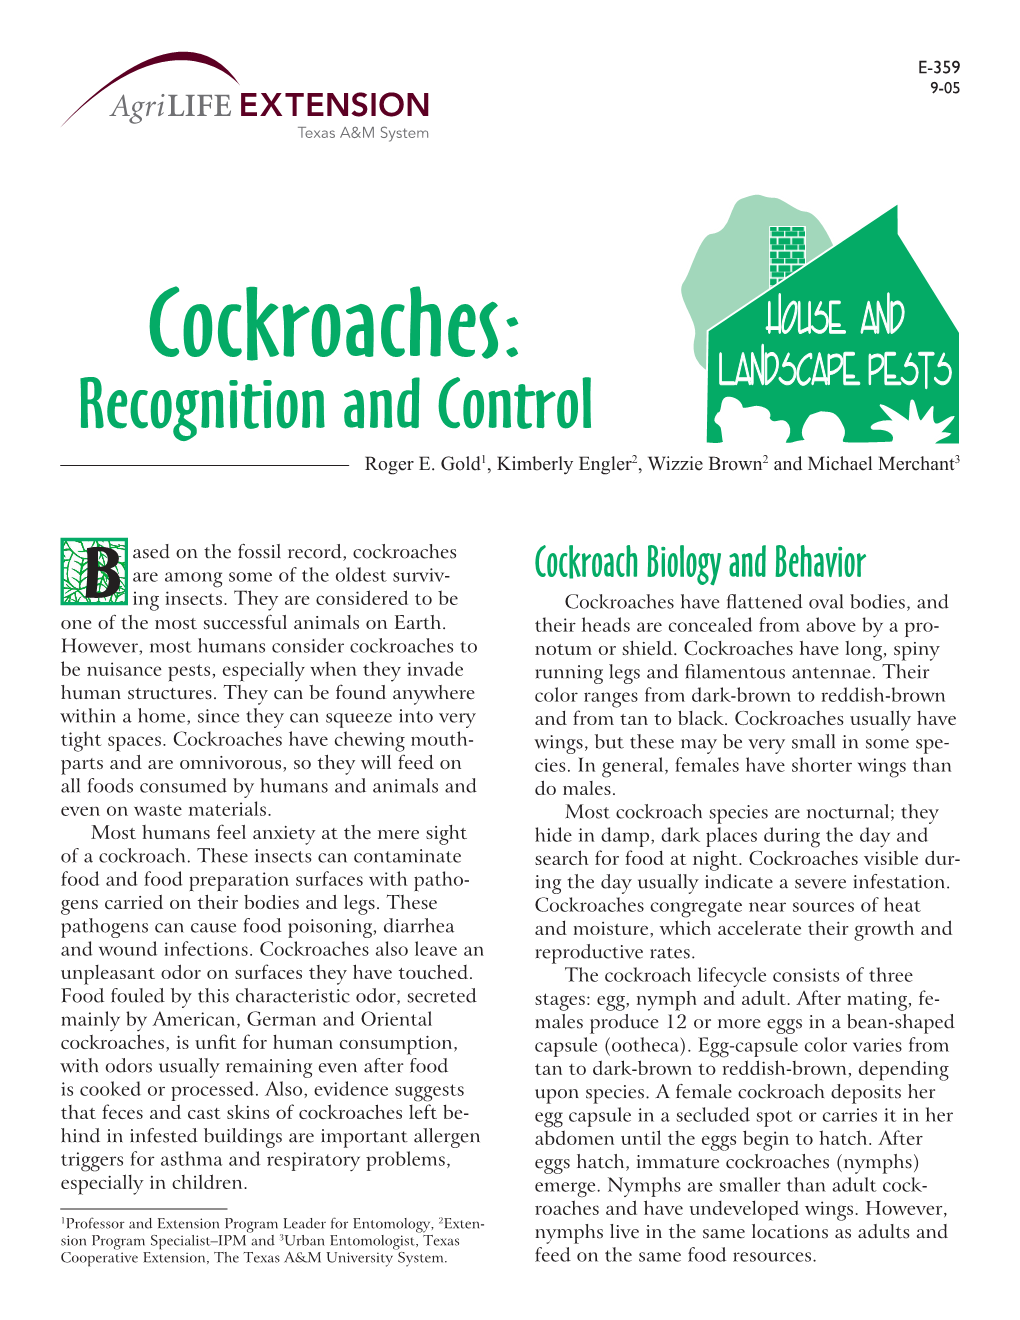 Cockroaches: Recognition and Control Roger E